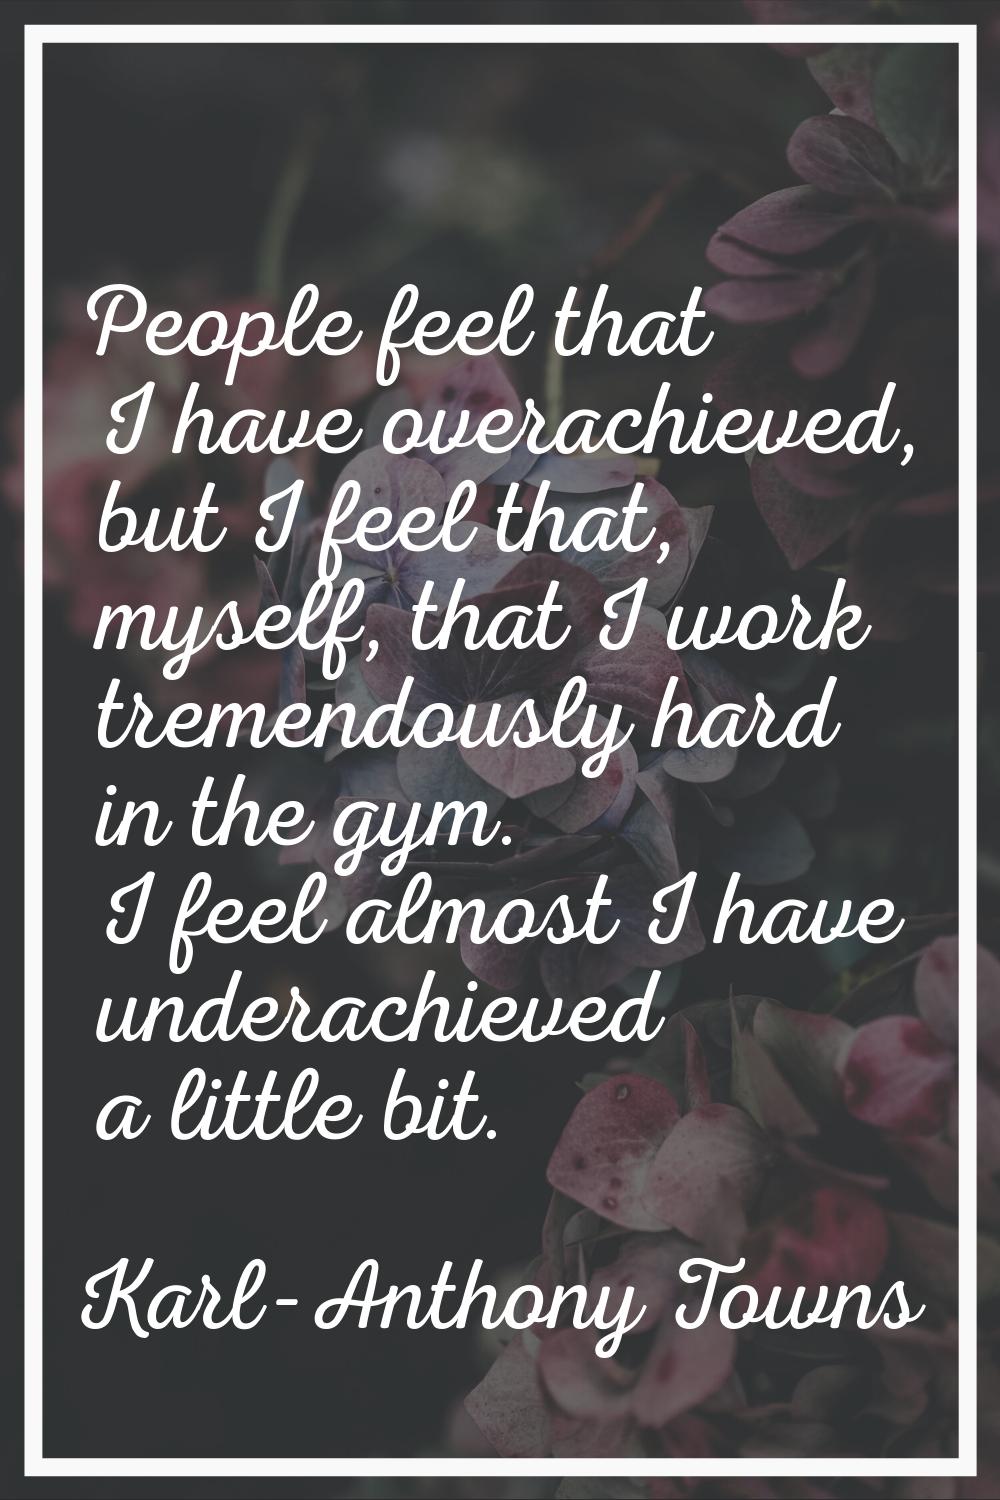 People feel that I have overachieved, but I feel that, myself, that I work tremendously hard in the